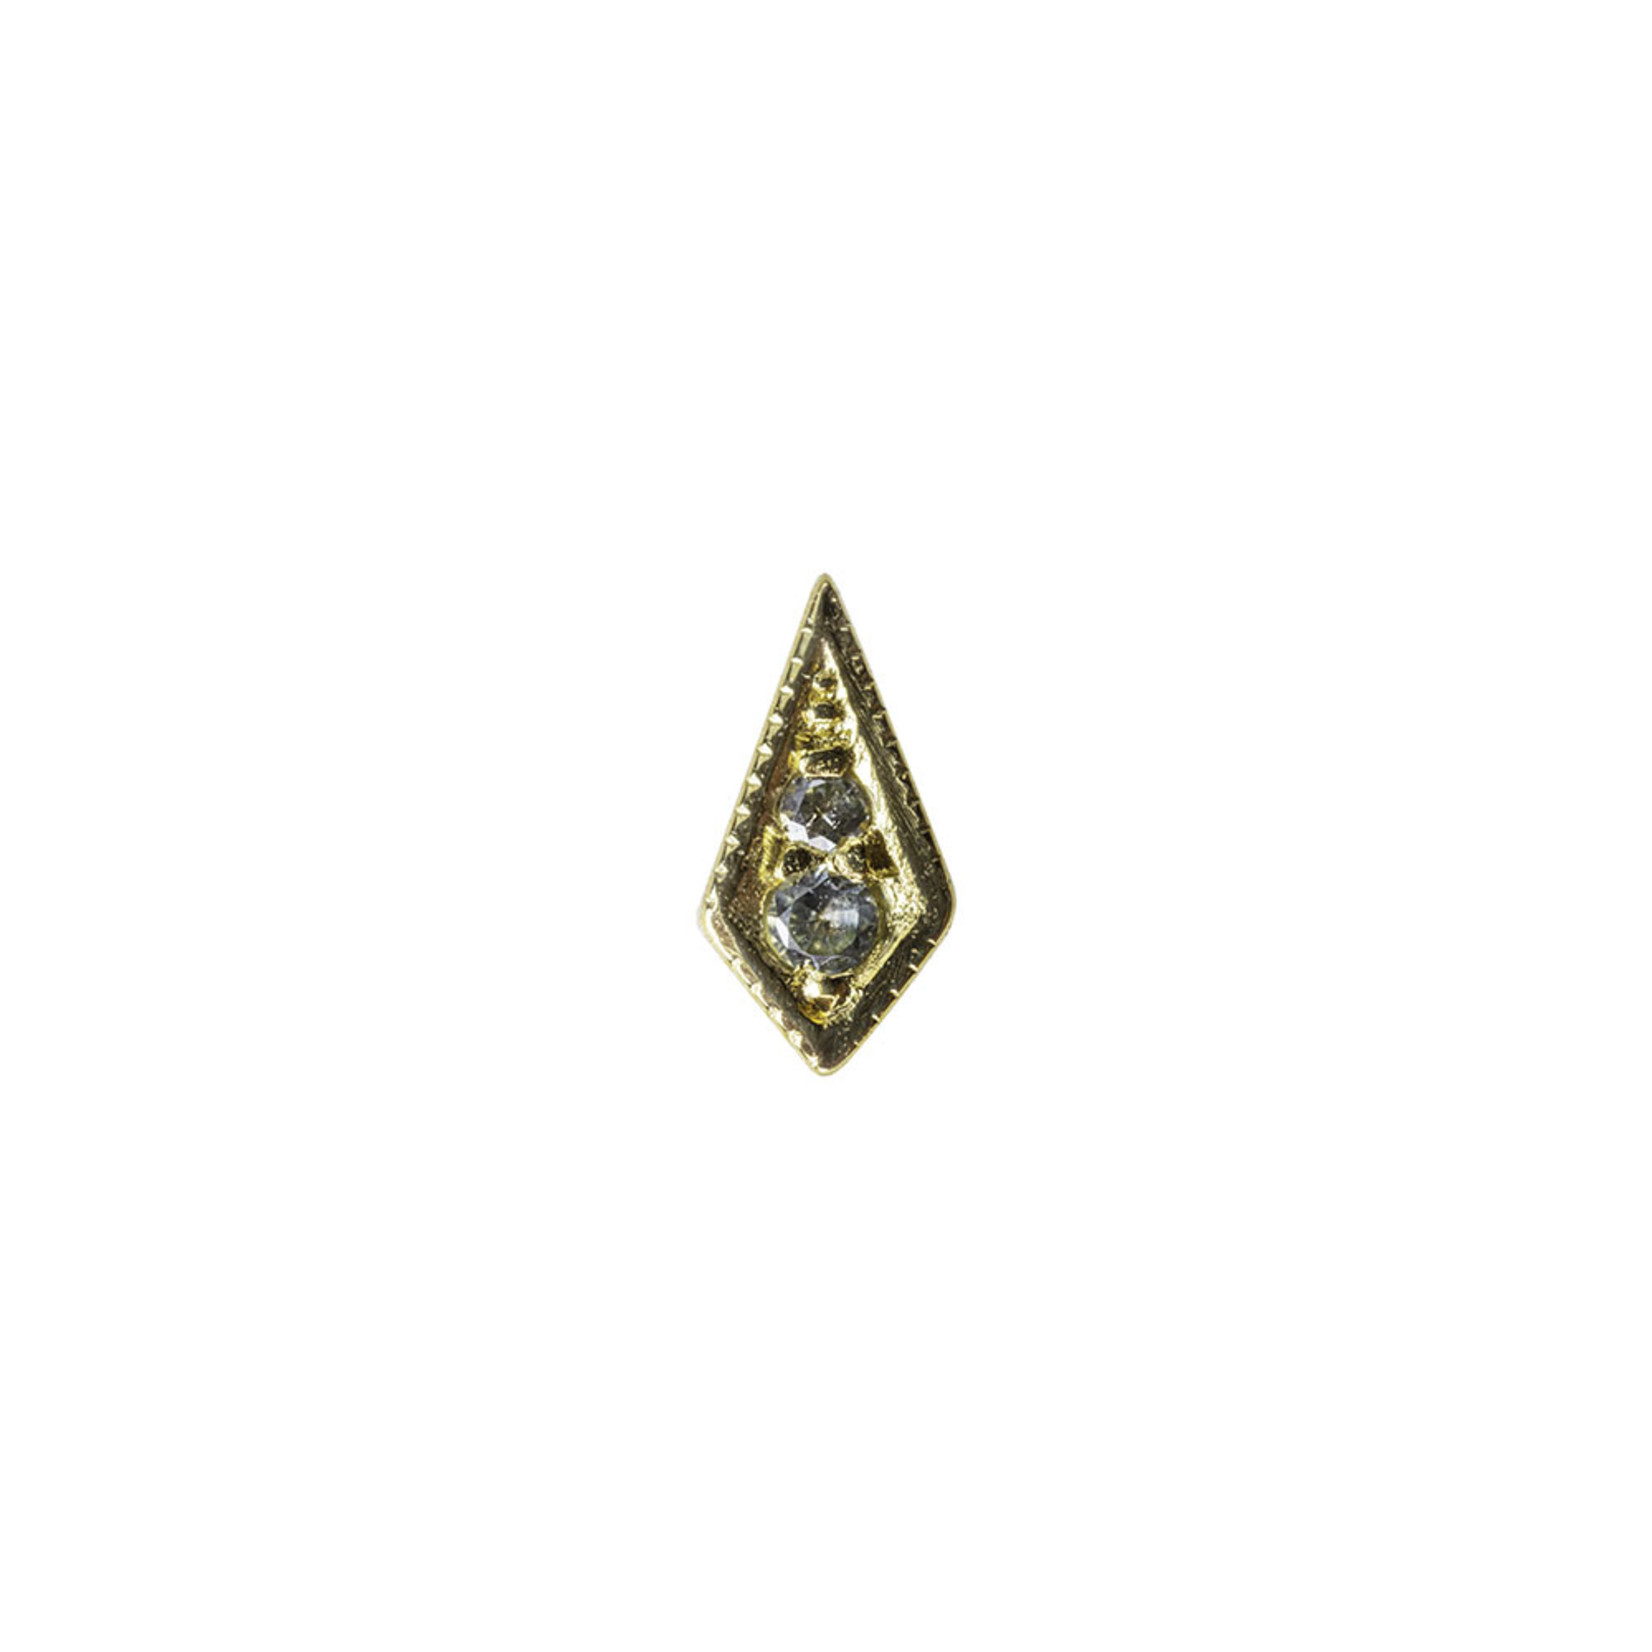 BVLA BVLA yellow gold "Dario" kite press fit end with 1.25 & 1.0 AA Grey Sapphire